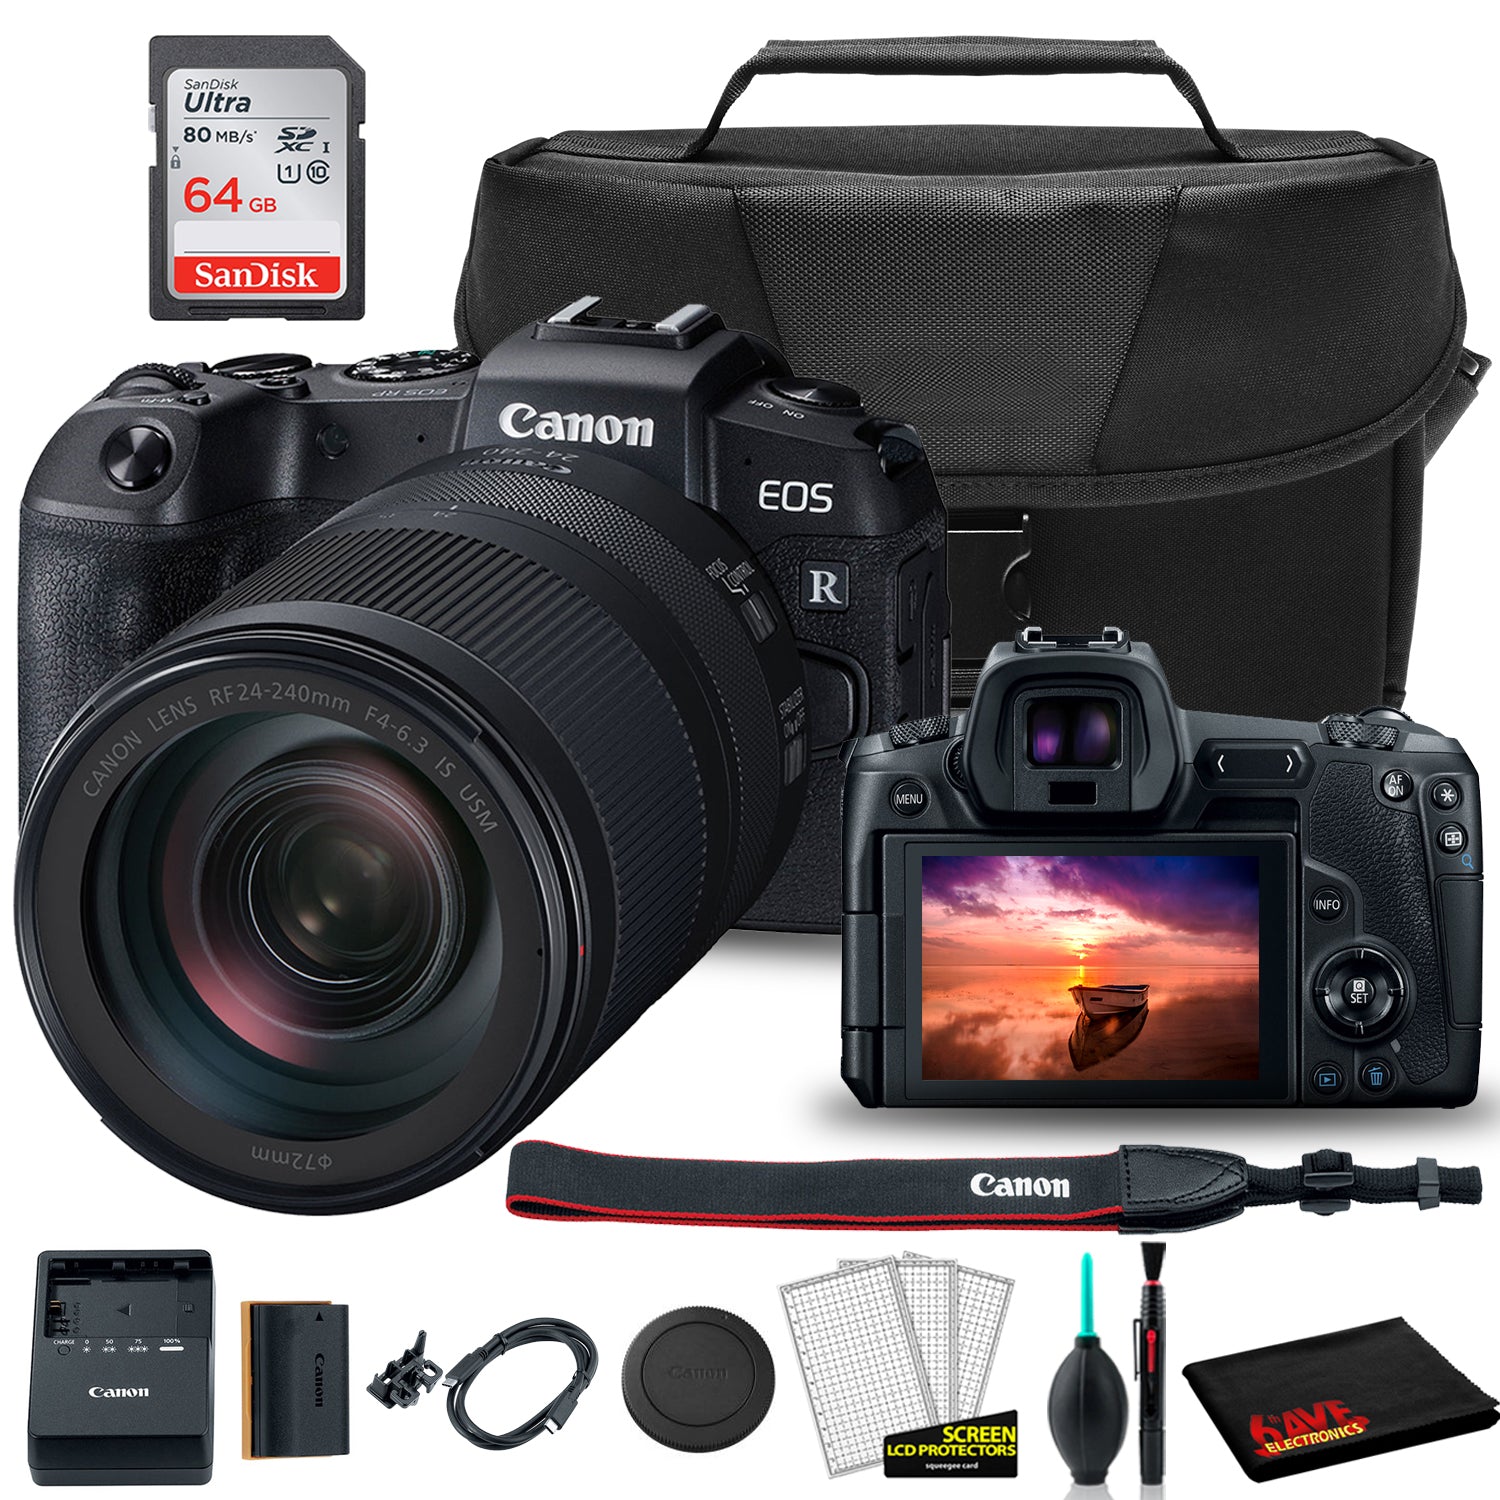 Canon EOS RP Mirrorless Digital Camera with 24-240mm Lens (3380C032) +  EOS Bag +  Sandisk Ultra 64GB Card + Clean and Care Kit